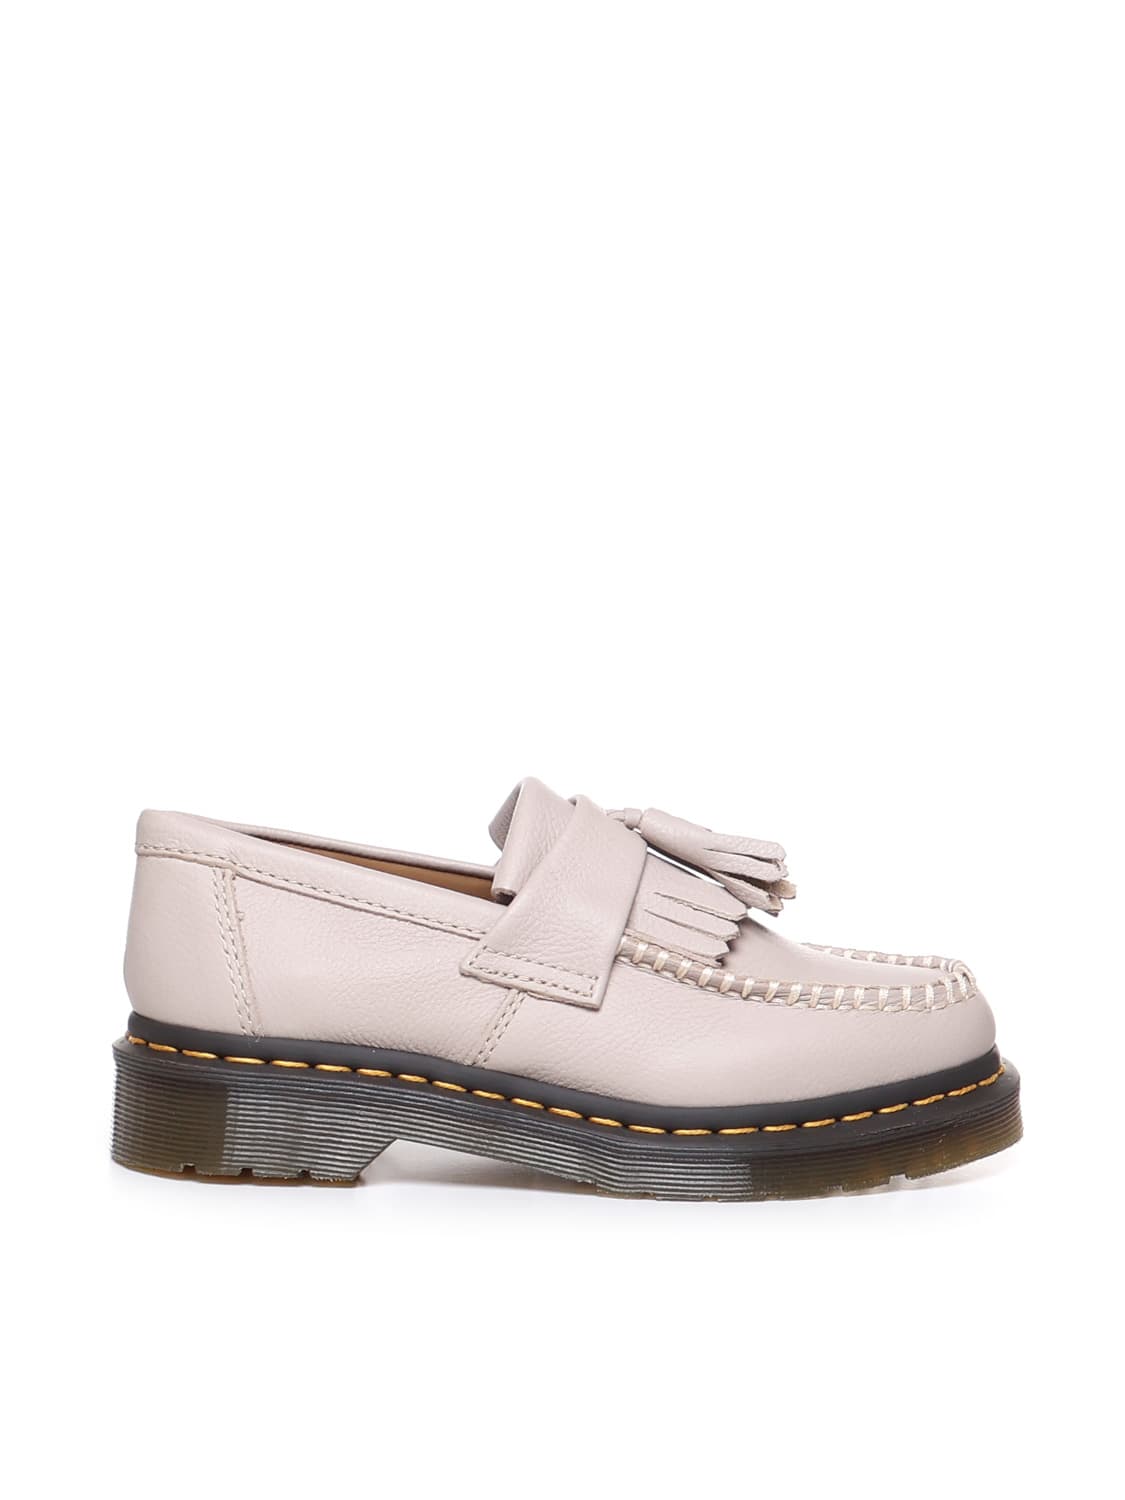 Dr. Martens' Adrian Moccasins With Tassels In Virginia Leather In Brownish-grey